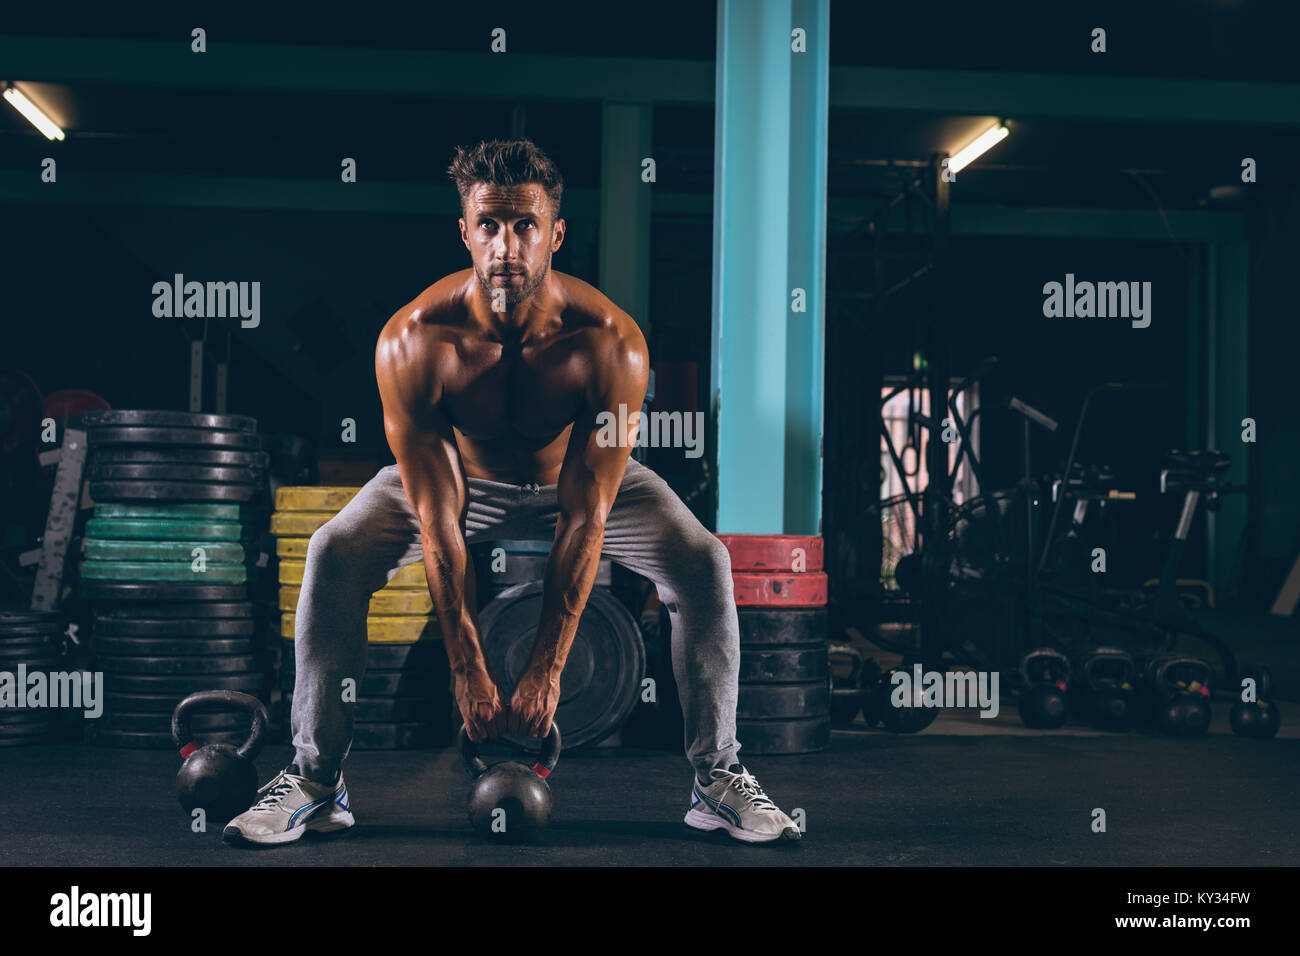 Muscular man exercising with kettlebell Stock Photo